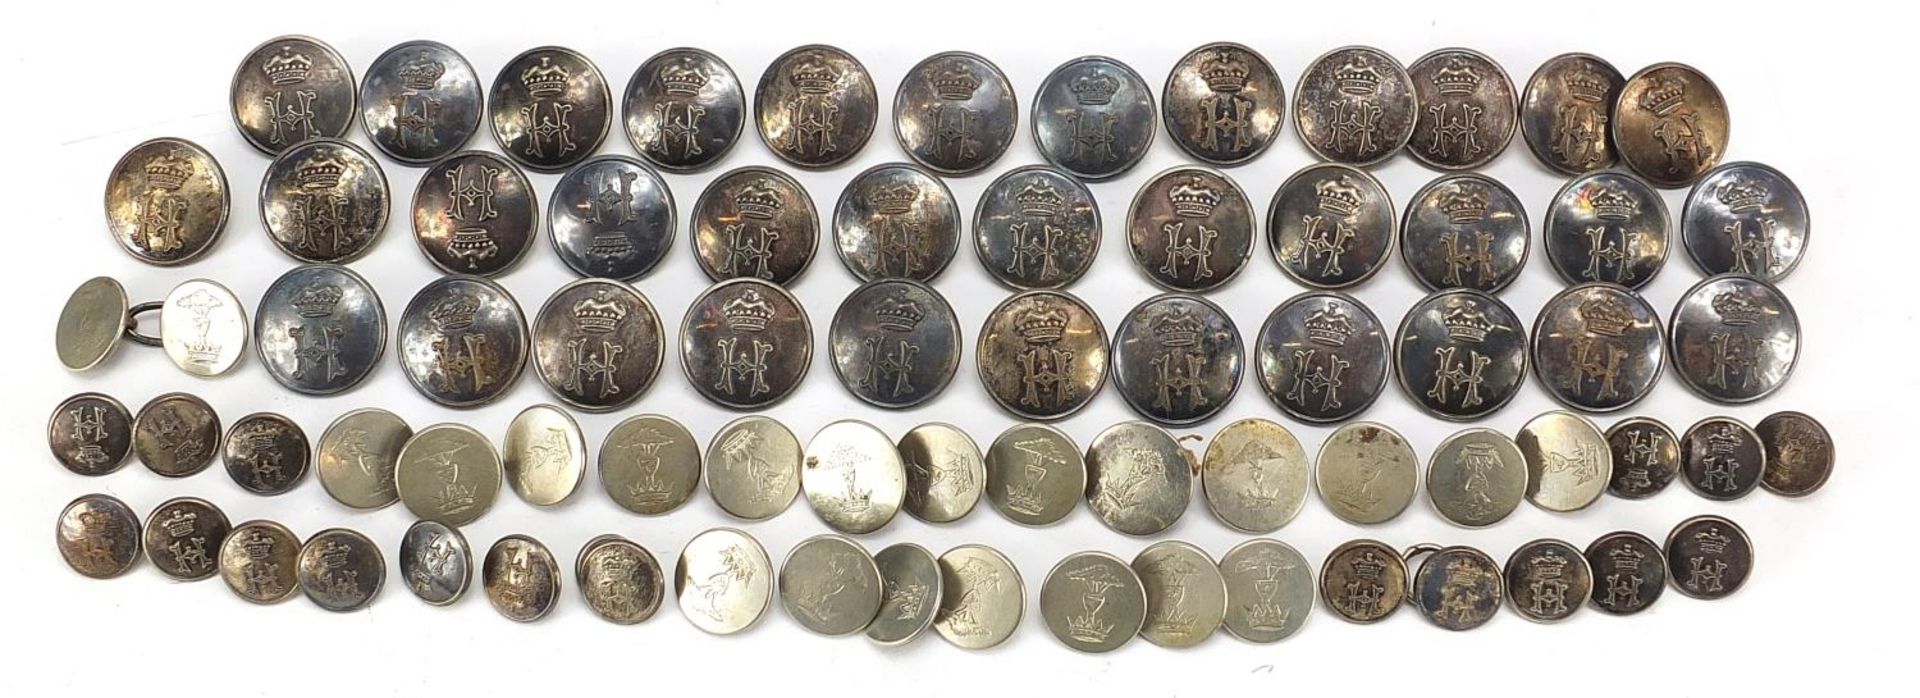 Collection of 19th century and later military buttons by Firmin of London and J R Gaunt of London